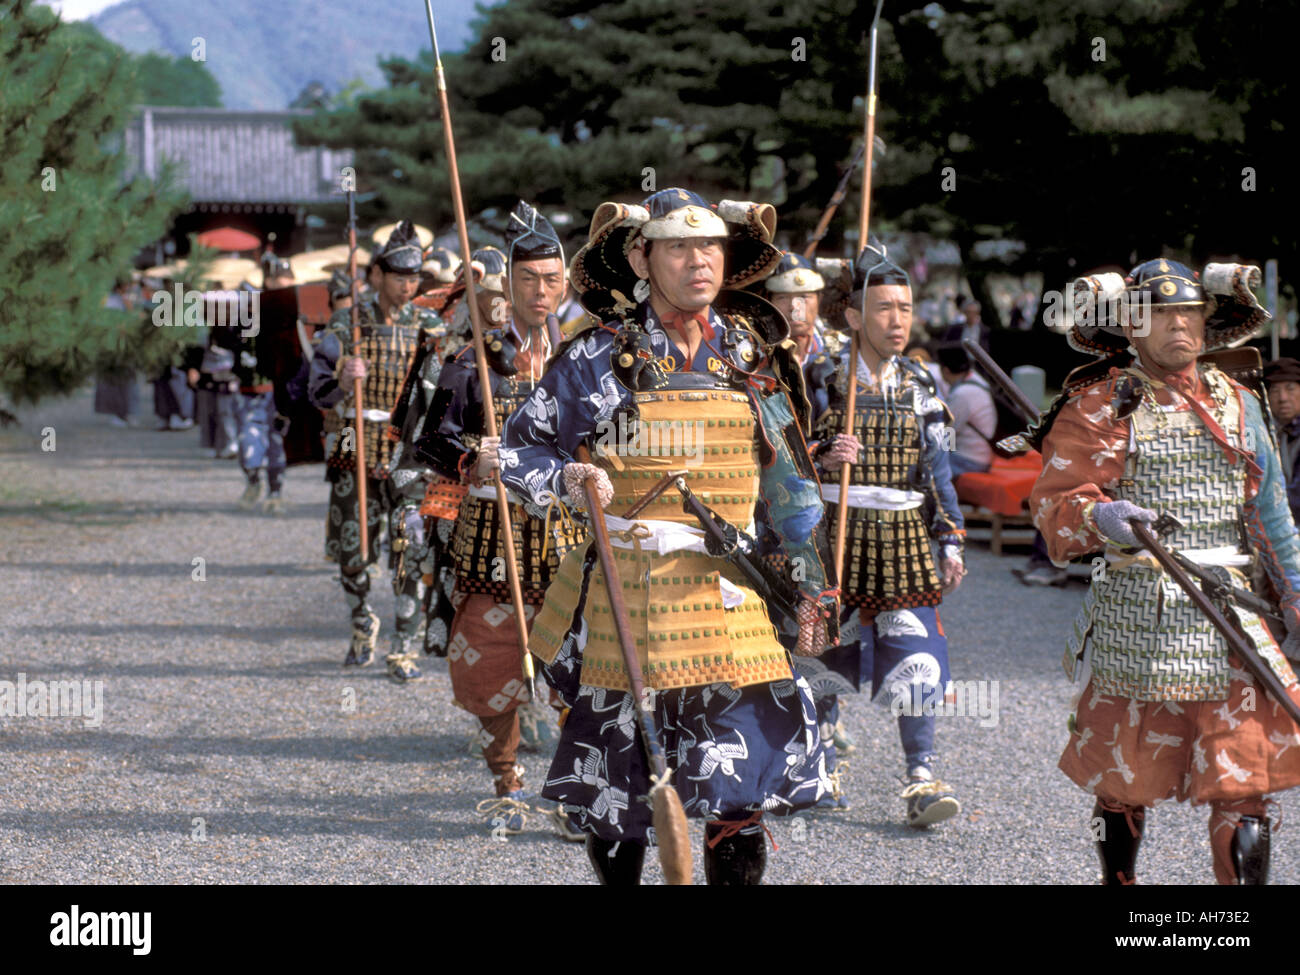 Group of samurai warriors marching in a procession during the Jidai Matsuri Festival of Ages in Kyoto, Japan Stock Photo